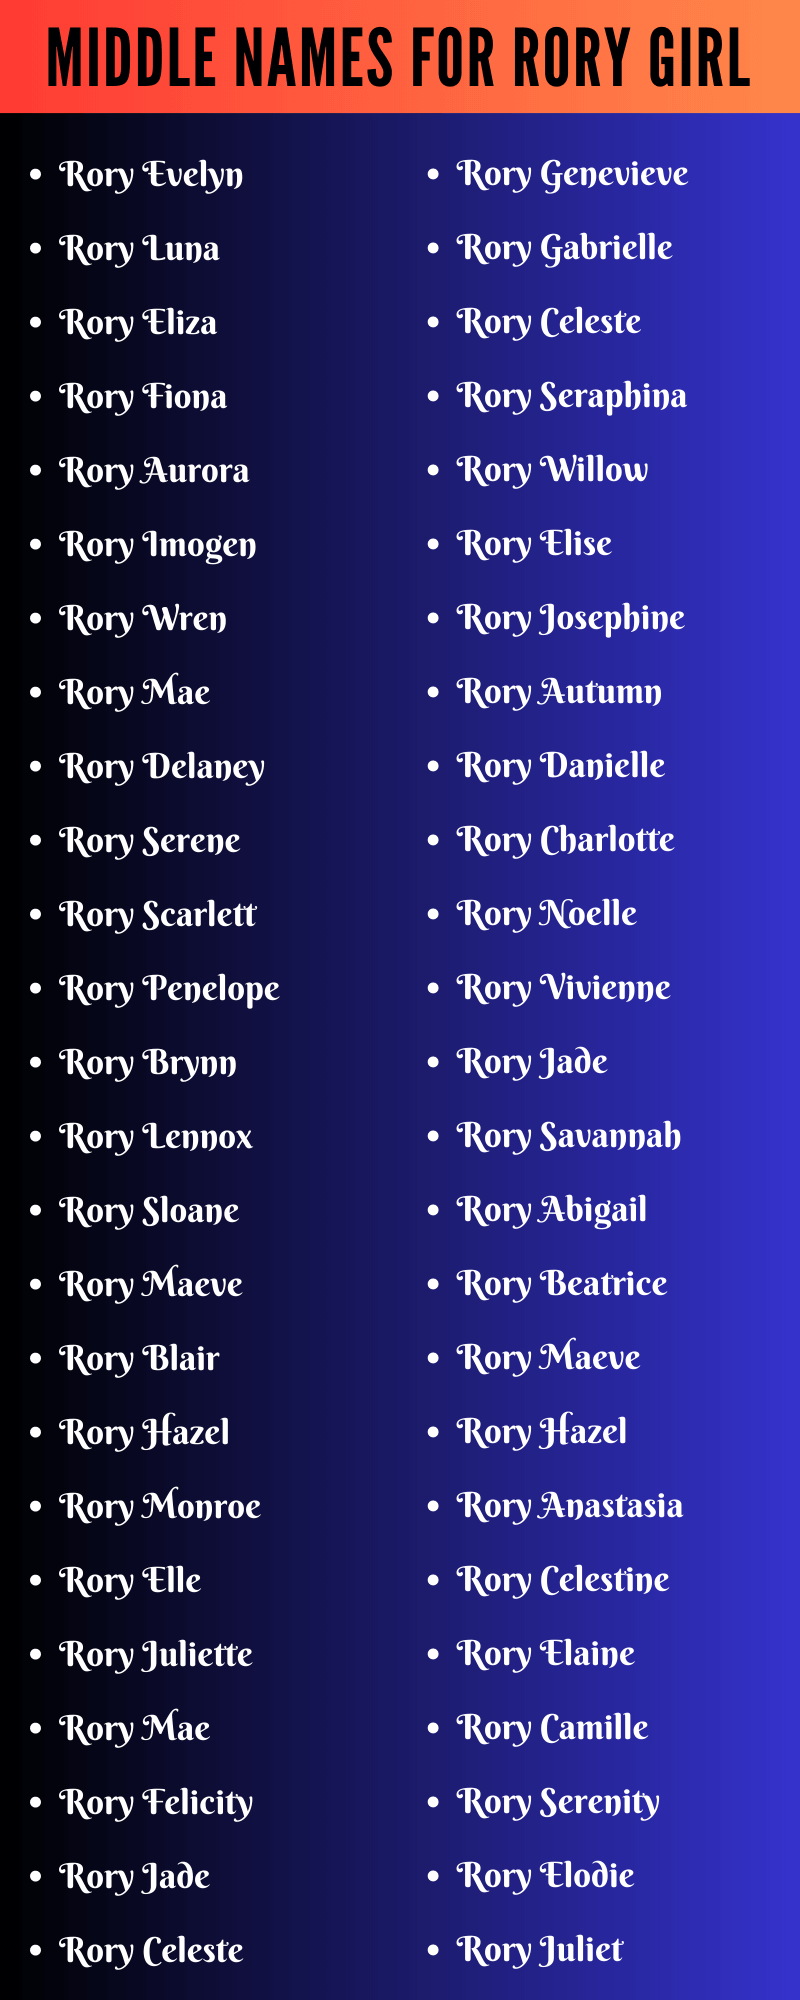 Middle Names For Rory Girl